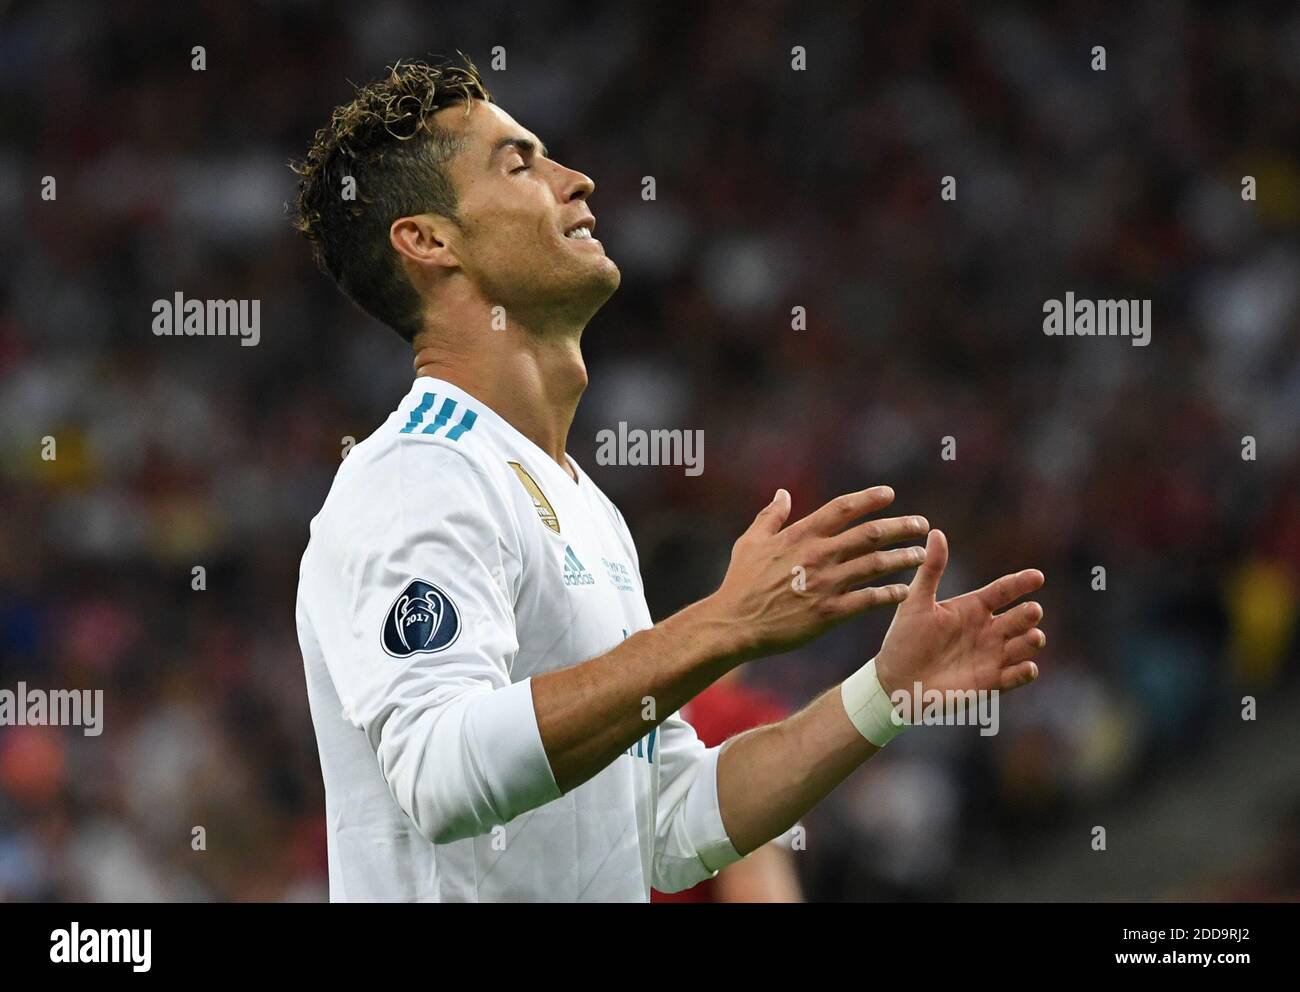 26 May 2018, Ukraine, Kiev: Champions League, Real Madrid vs FC Liverpool, finals at the Olimpiyskiy National Sports Complex. Madrid's Cristiano Ronaldo in action. Photo by Ina Fassbender/DPA/ABACAPRESS.COM Stock Photo